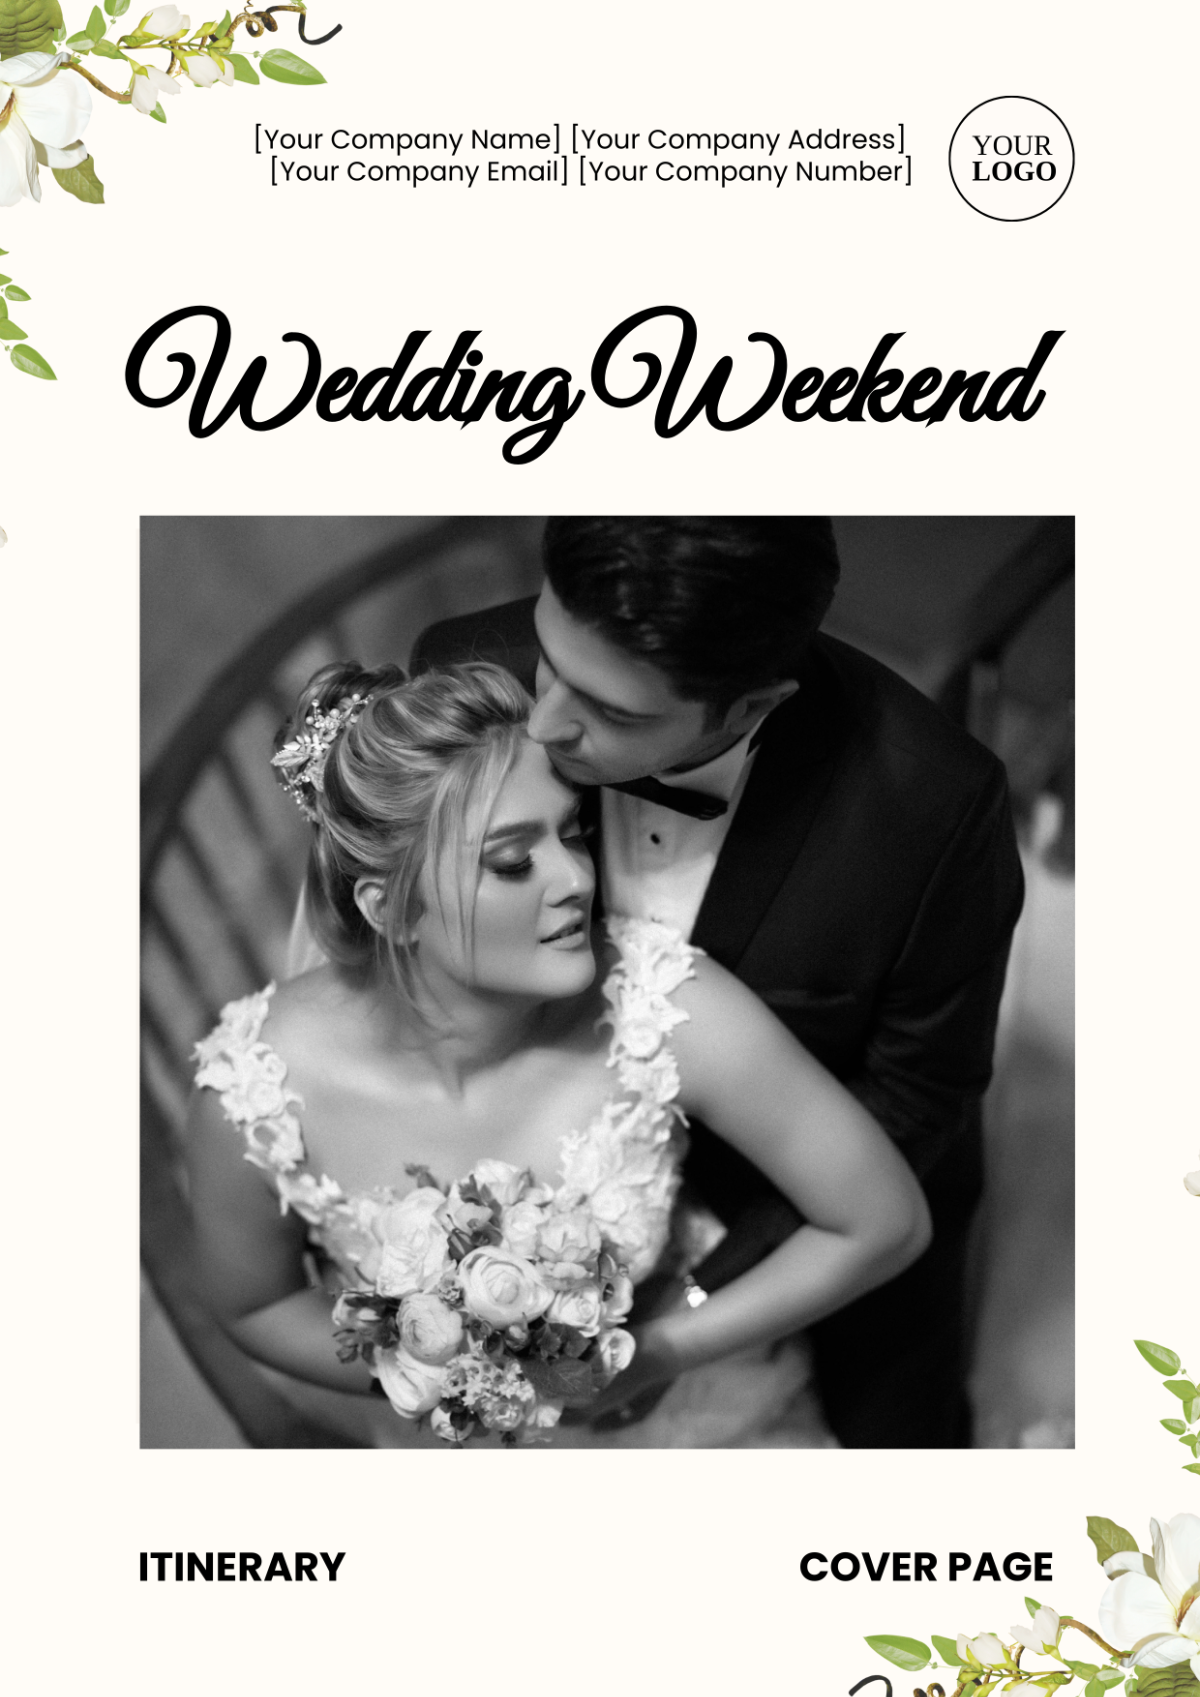 Wedding Weekend Itinerary Cover Page